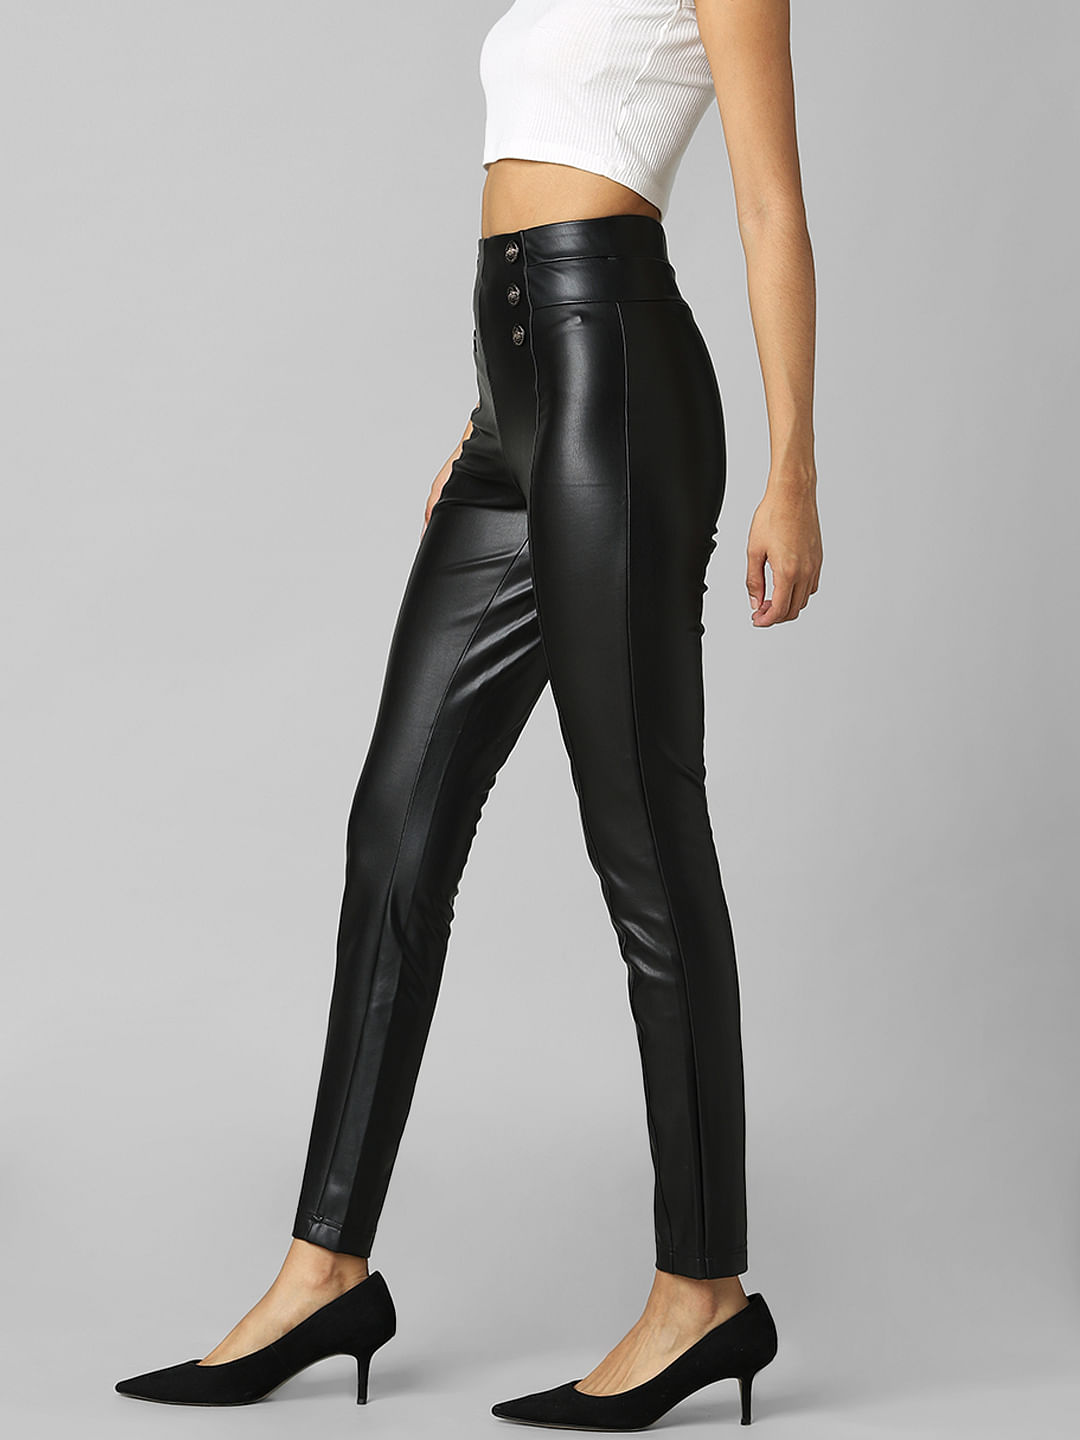 NAKD high waisted flared fauxleather pants in black  ASOS